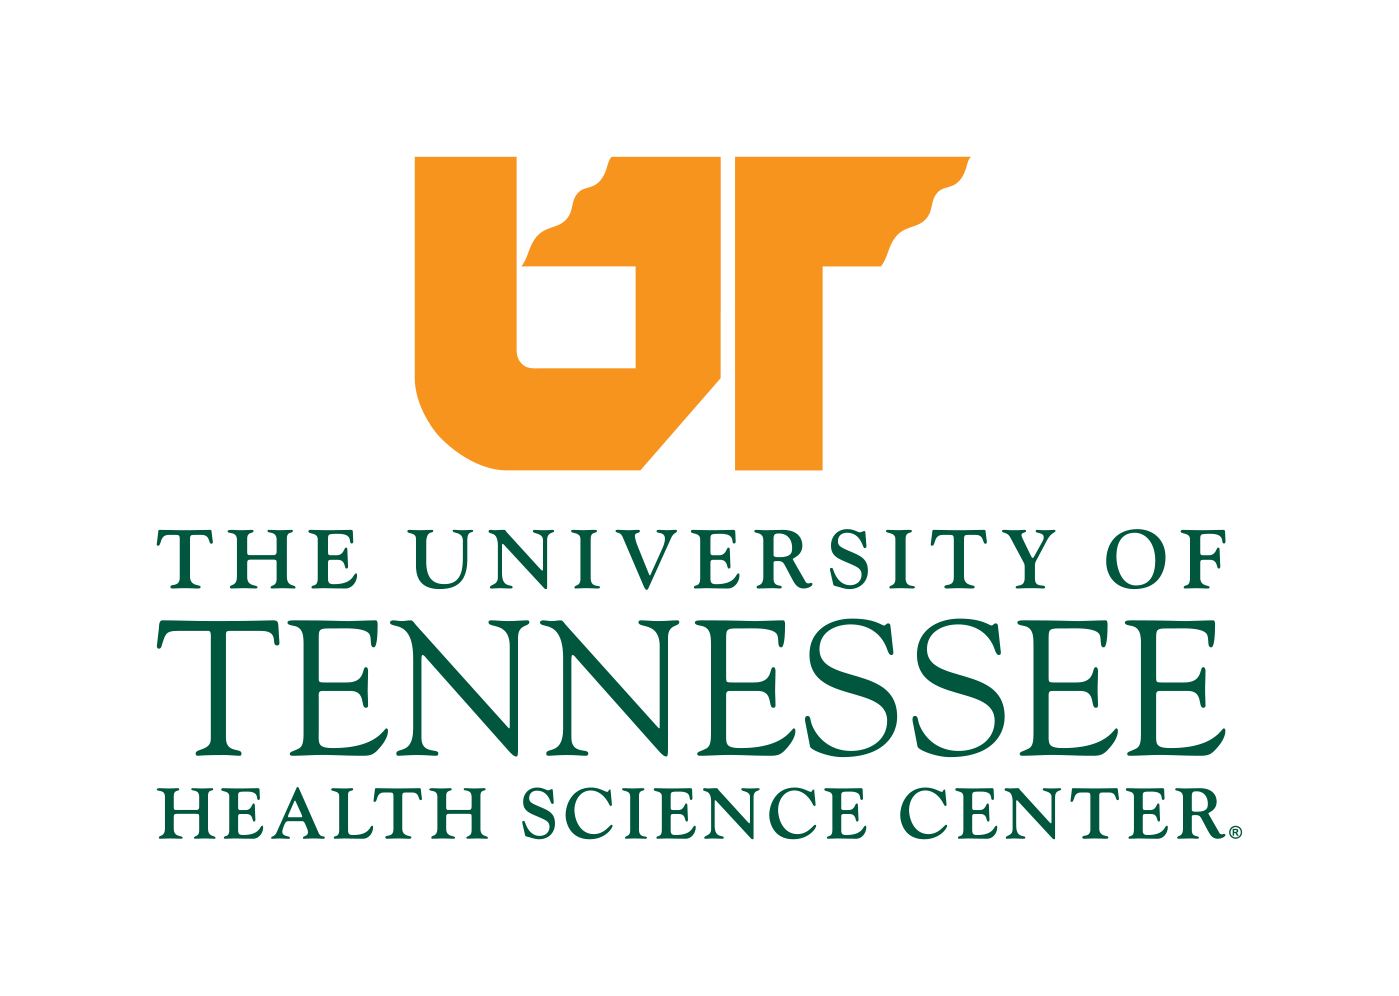 University of Tennessee, Health Science Center